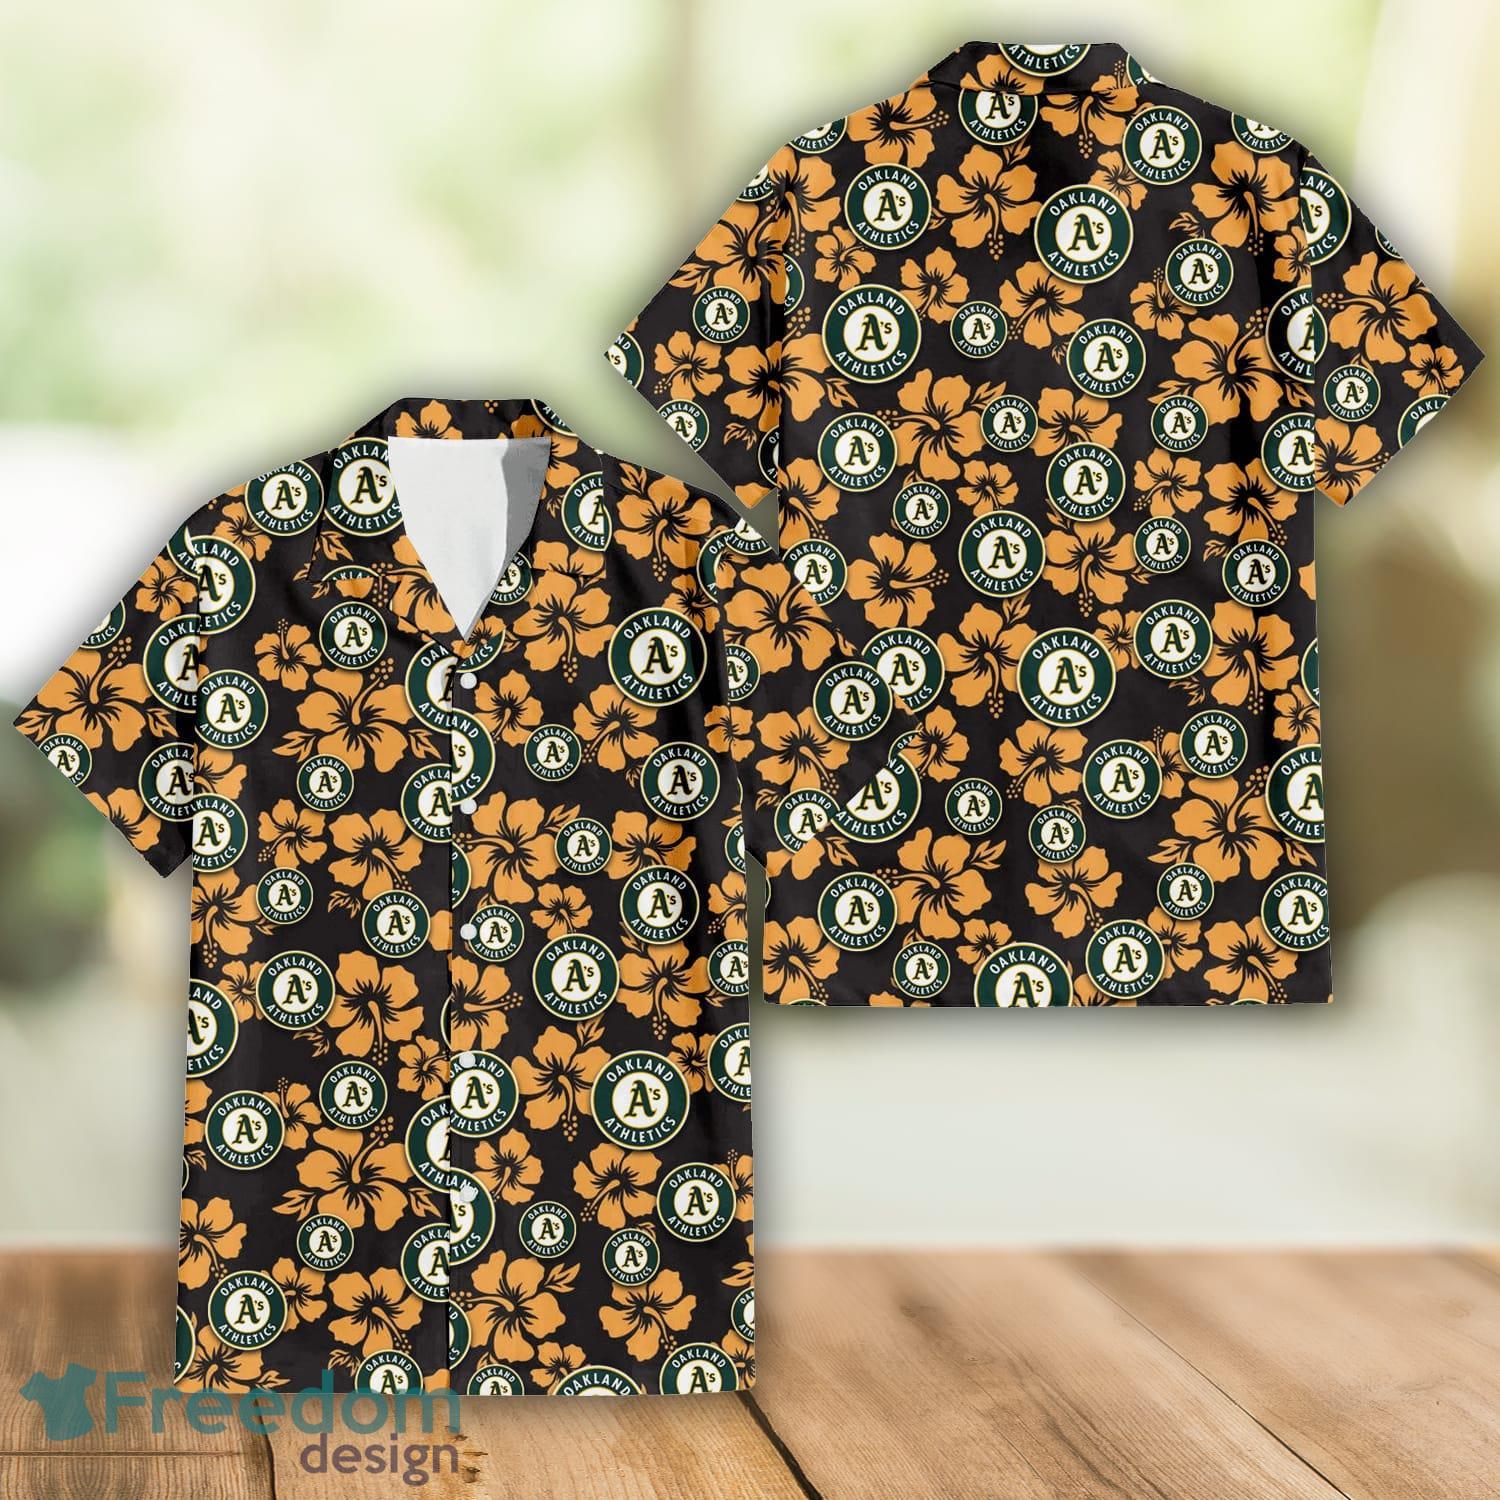 Oakland Athletics Logo And Yellow Flower Tropical Hawaiian Shirt For Fans -  Freedomdesign